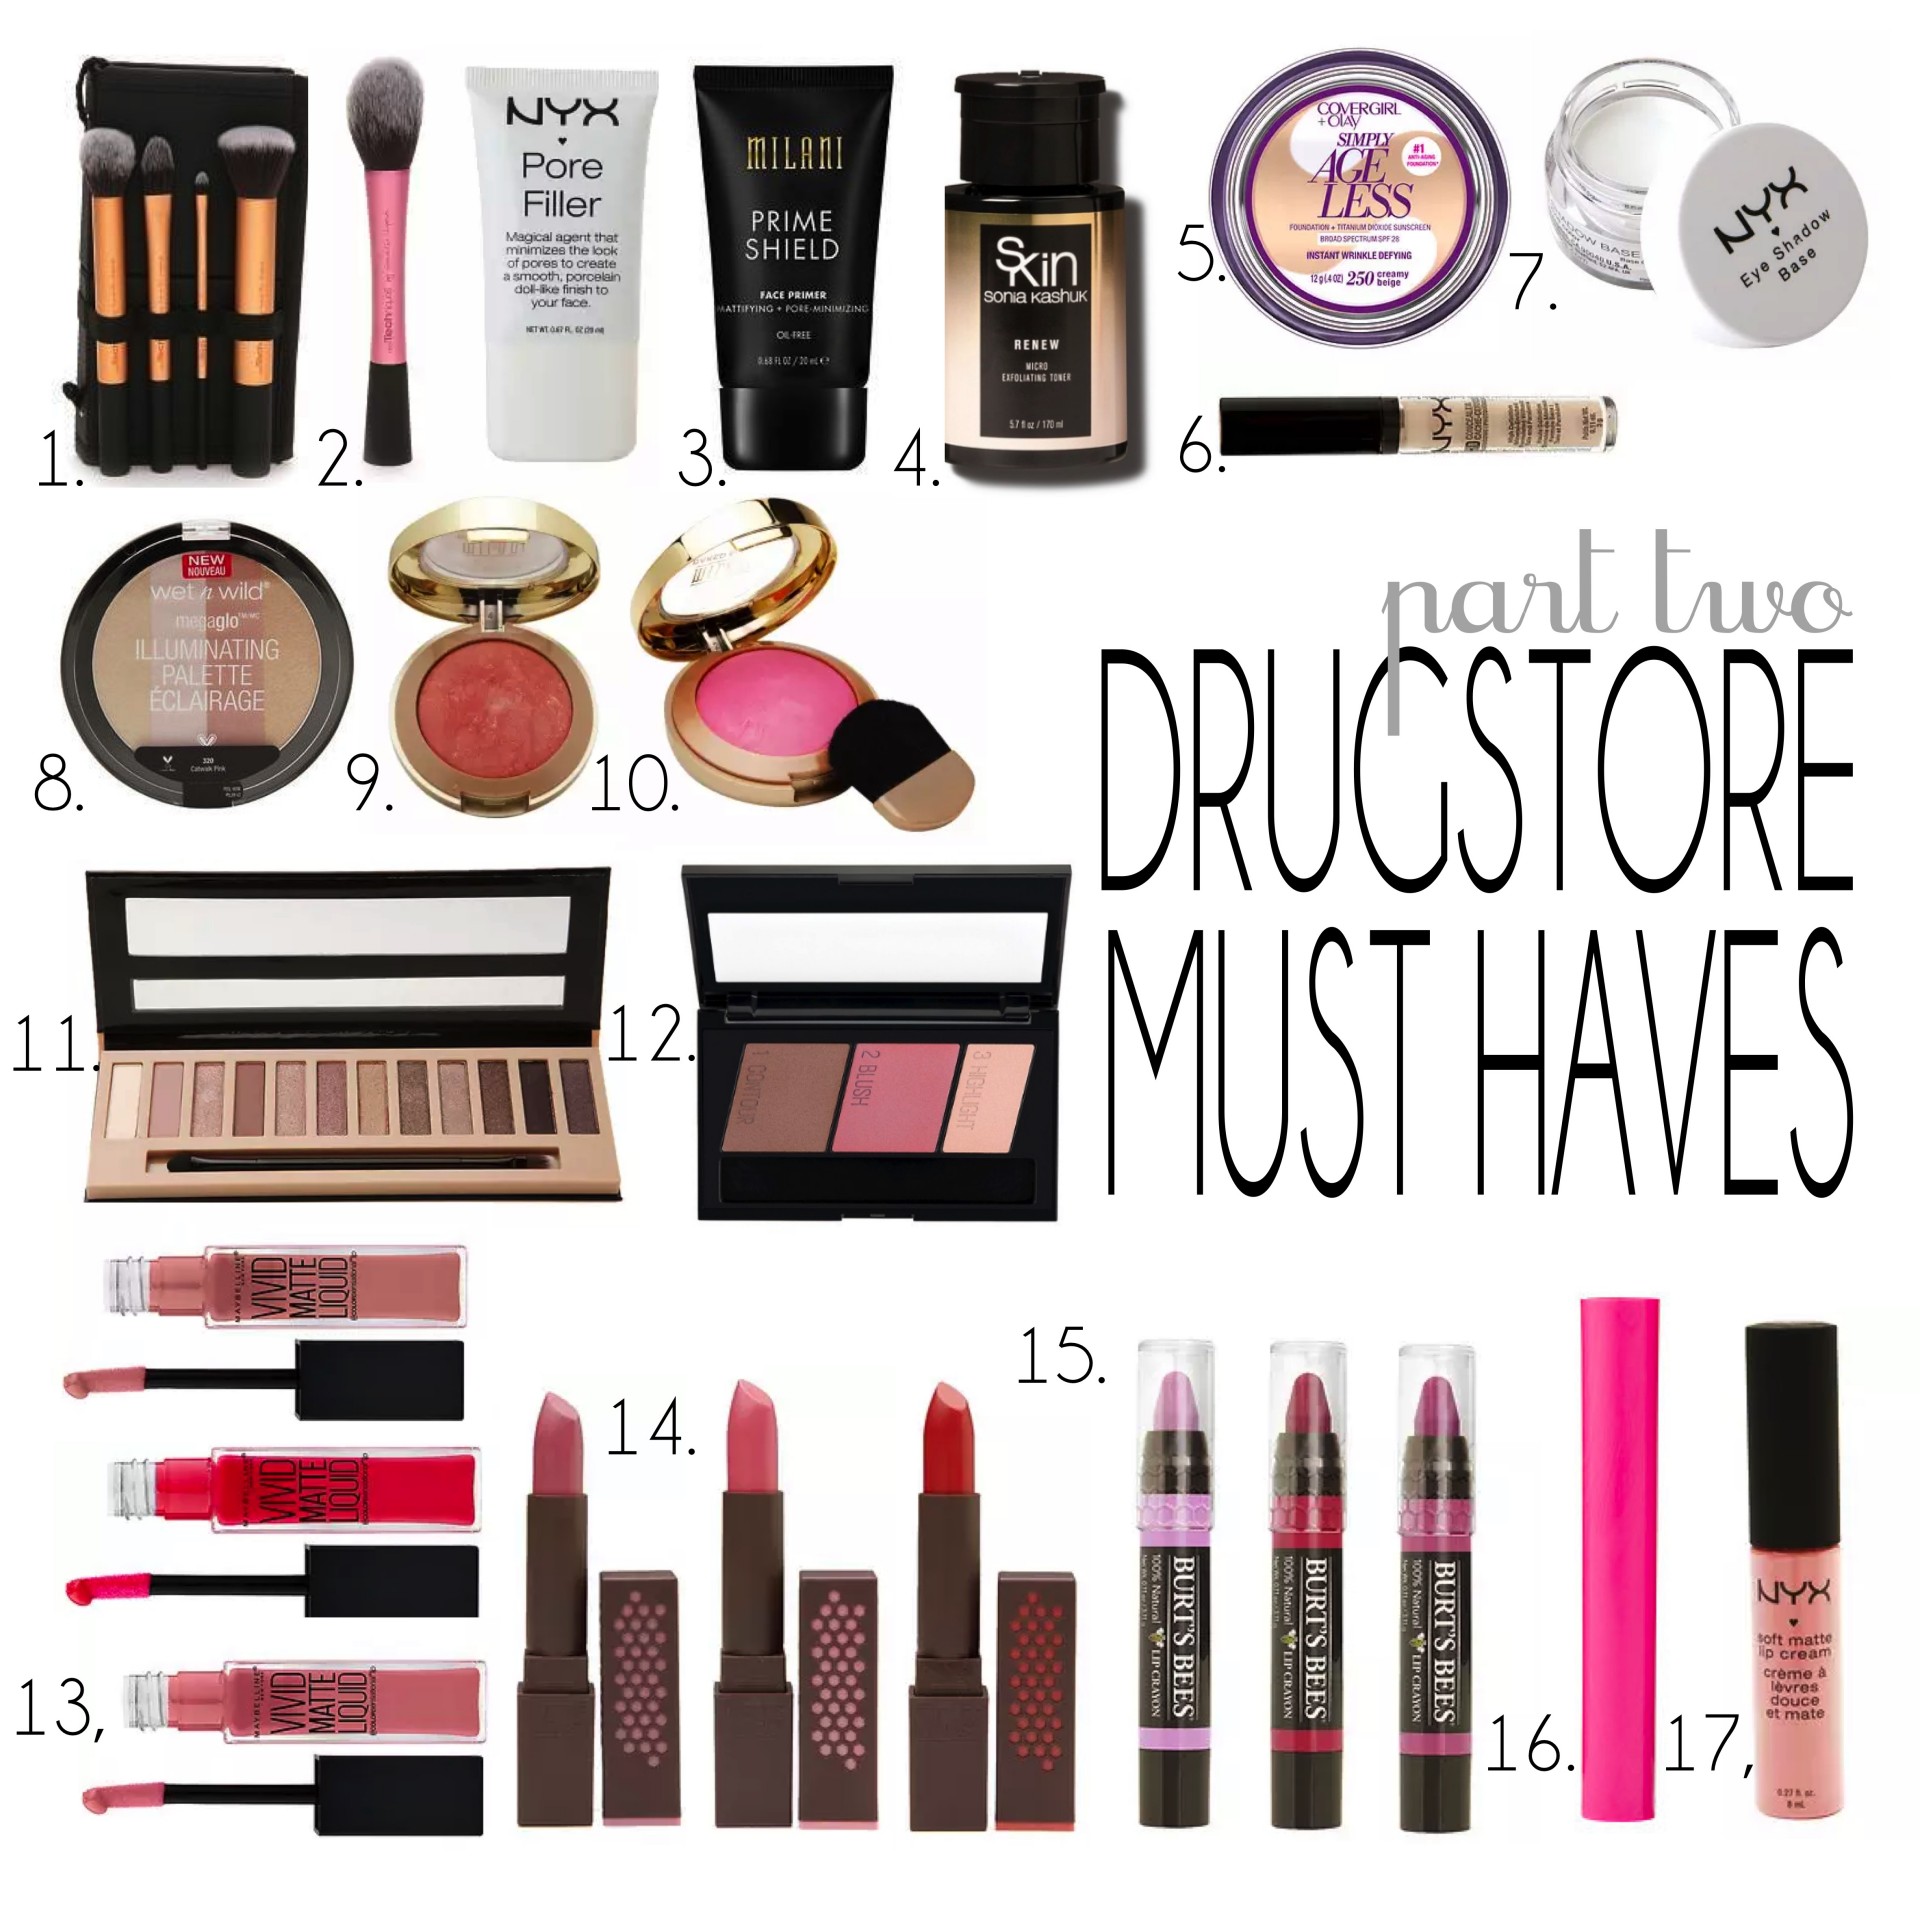 Drugstore Beauty Products, Drugstore Beauty Brands that are trending, Lunchpails and Lipstick drugstore finds